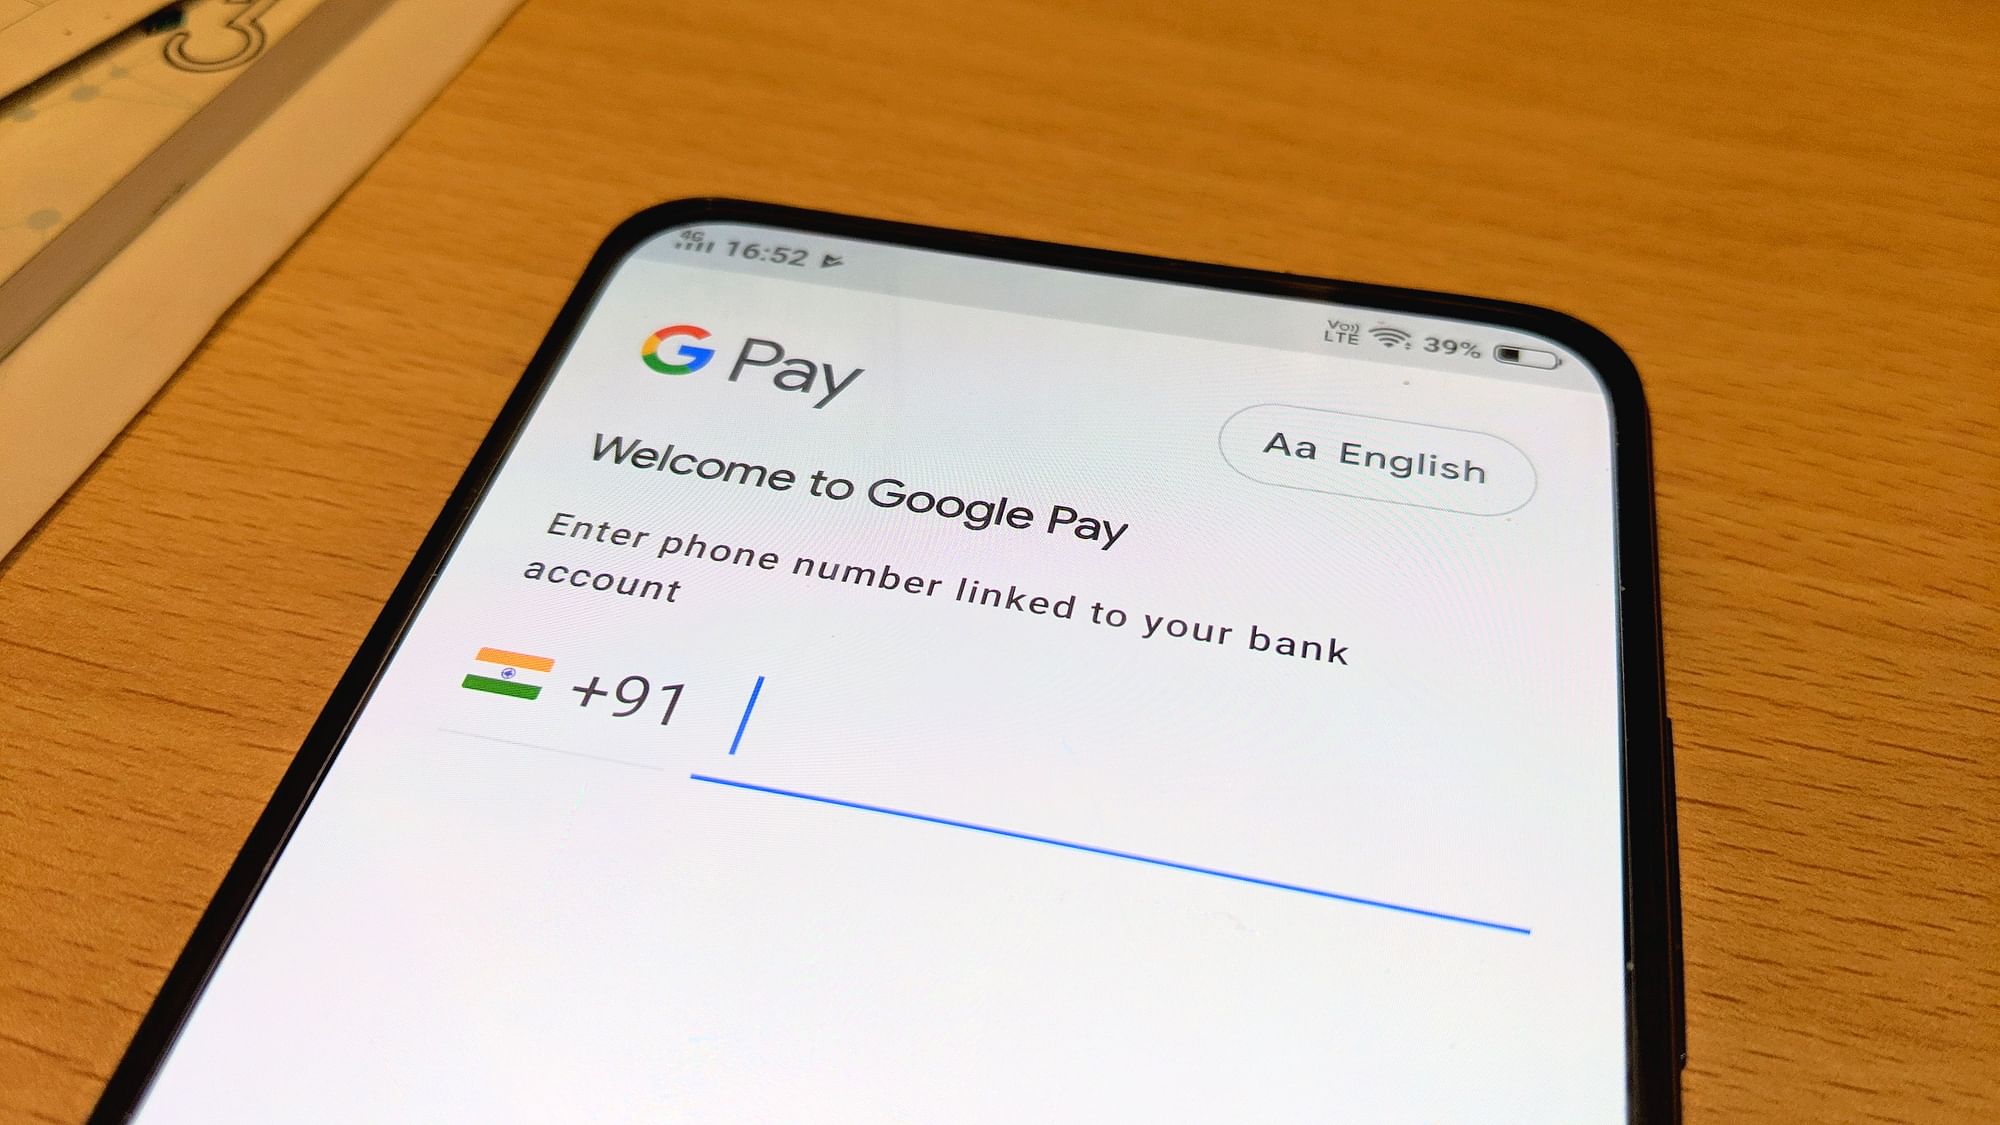 IRCTC Train Ticket Booking: Google Pay launched as Tez in 2018 for Indian users.